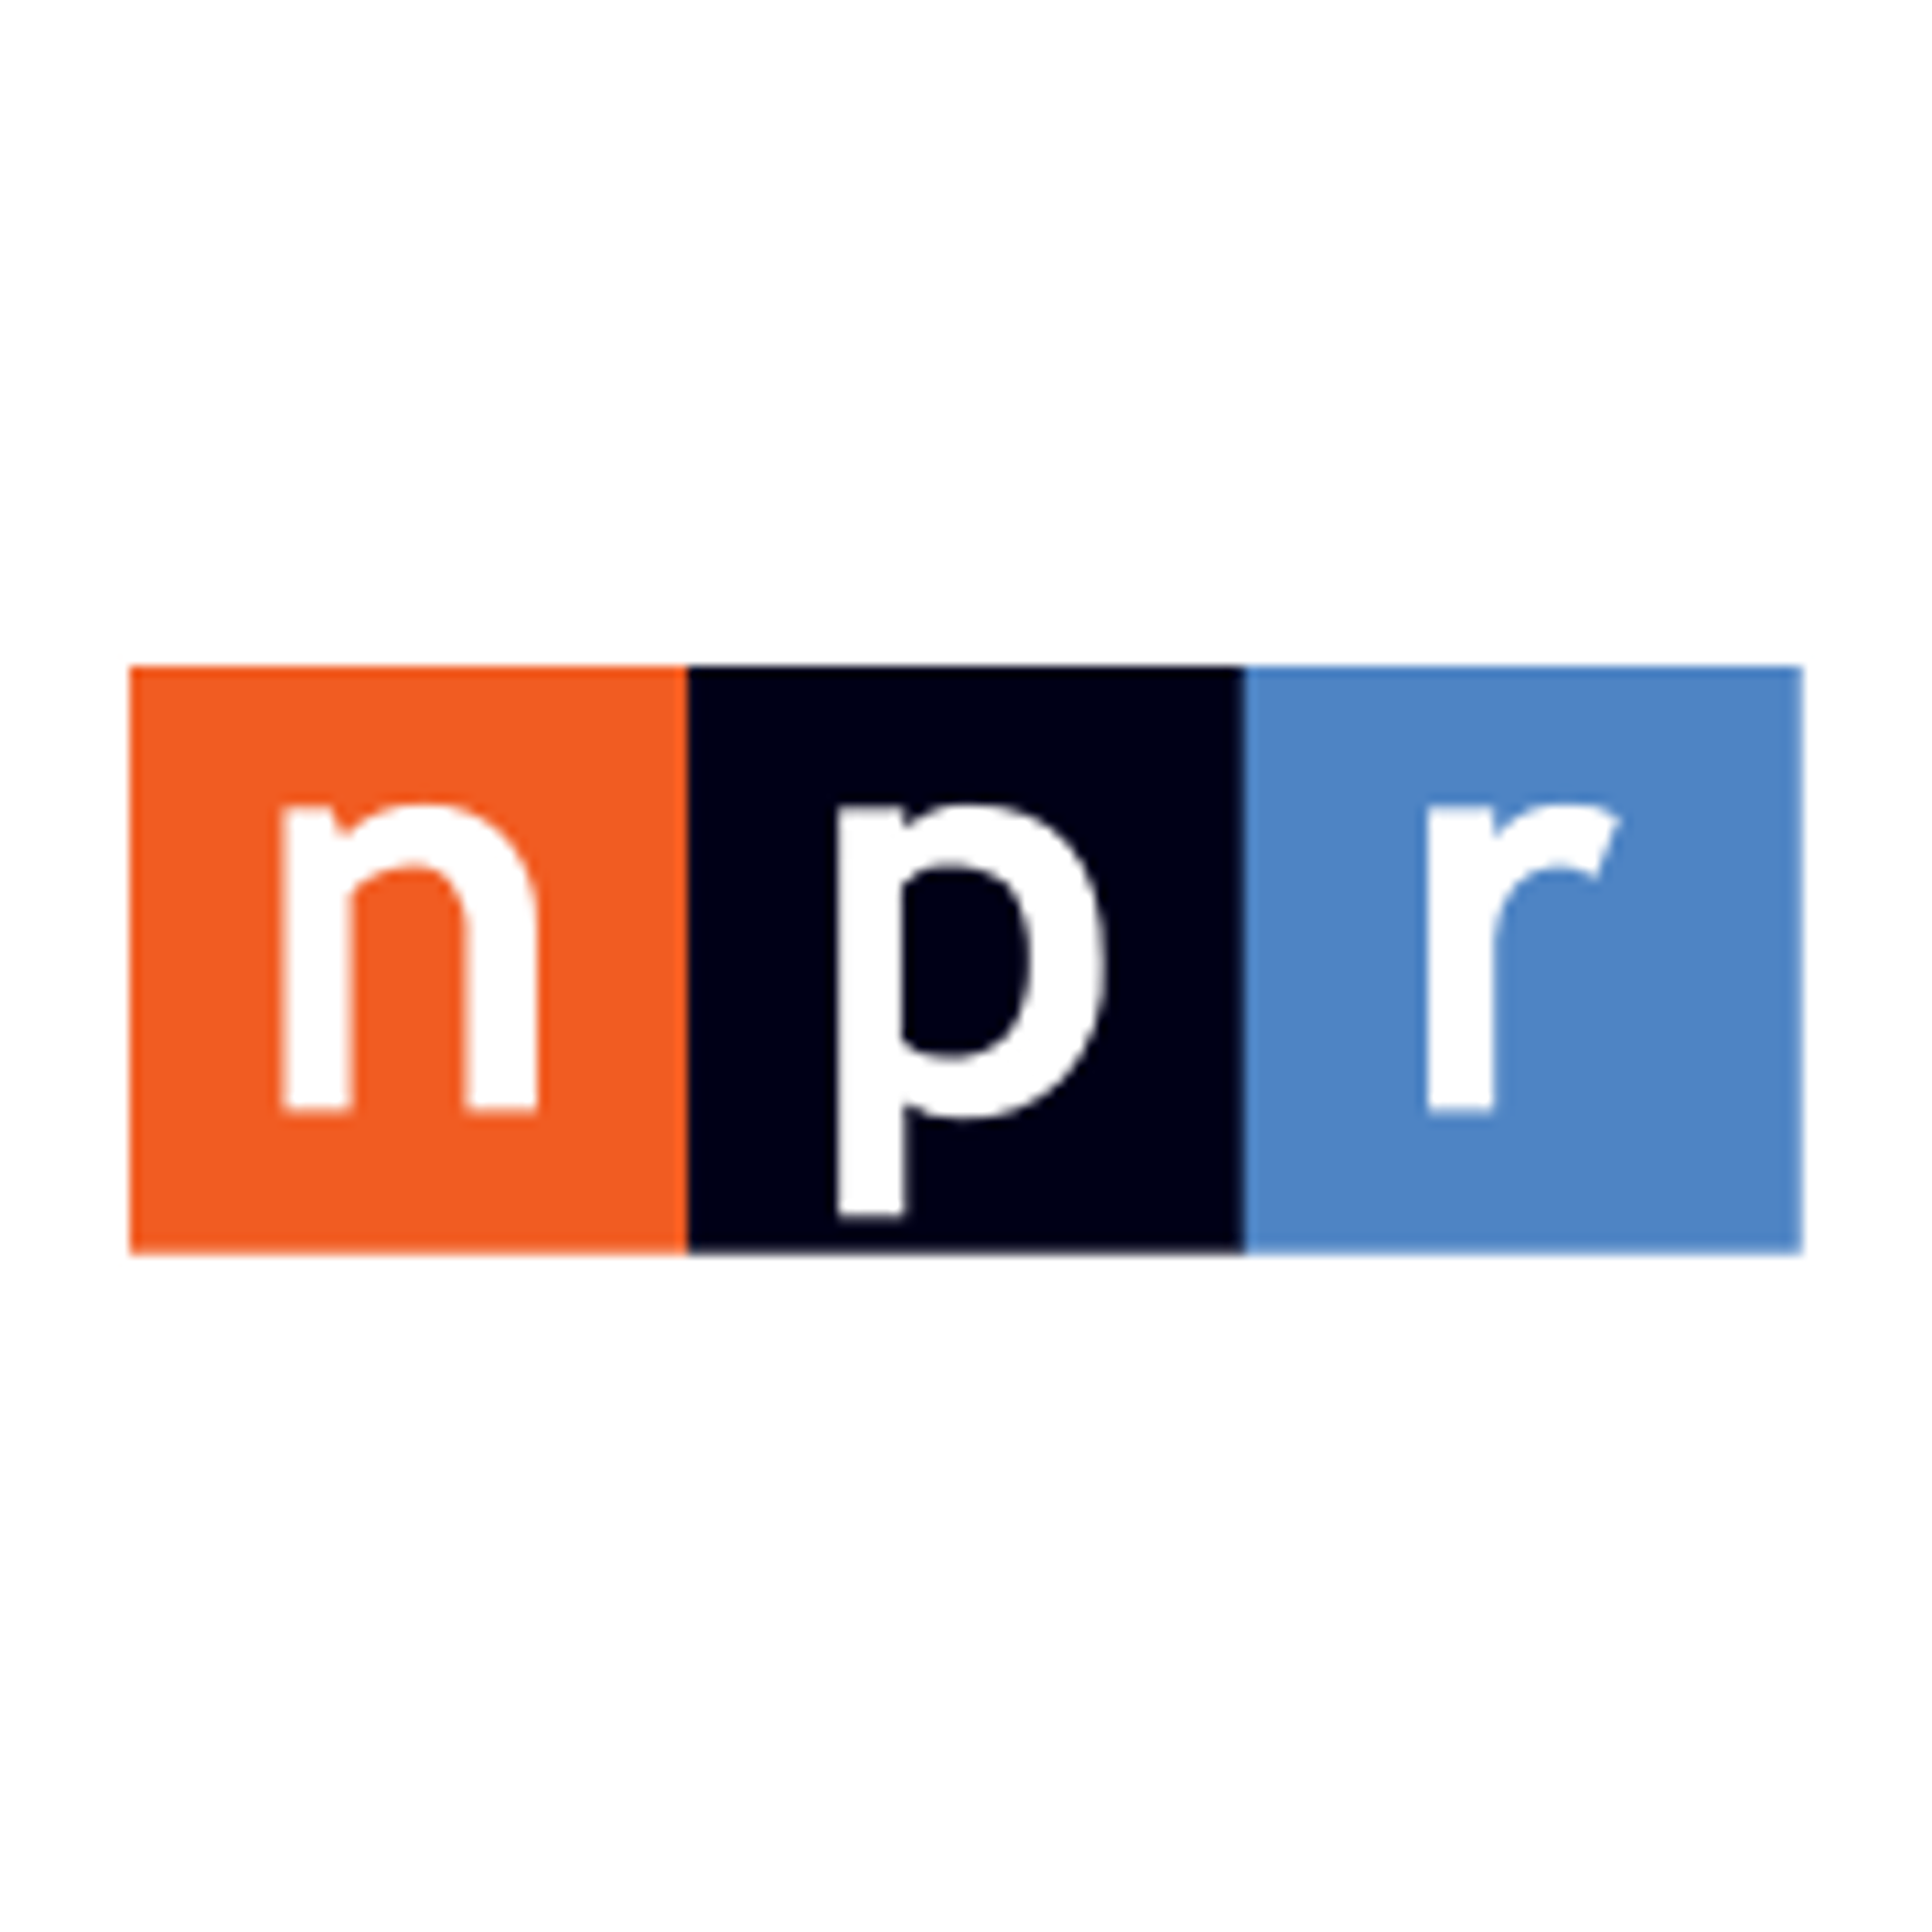 NPR quits Twitter after being falsely labeled as 'state-affiliated media'